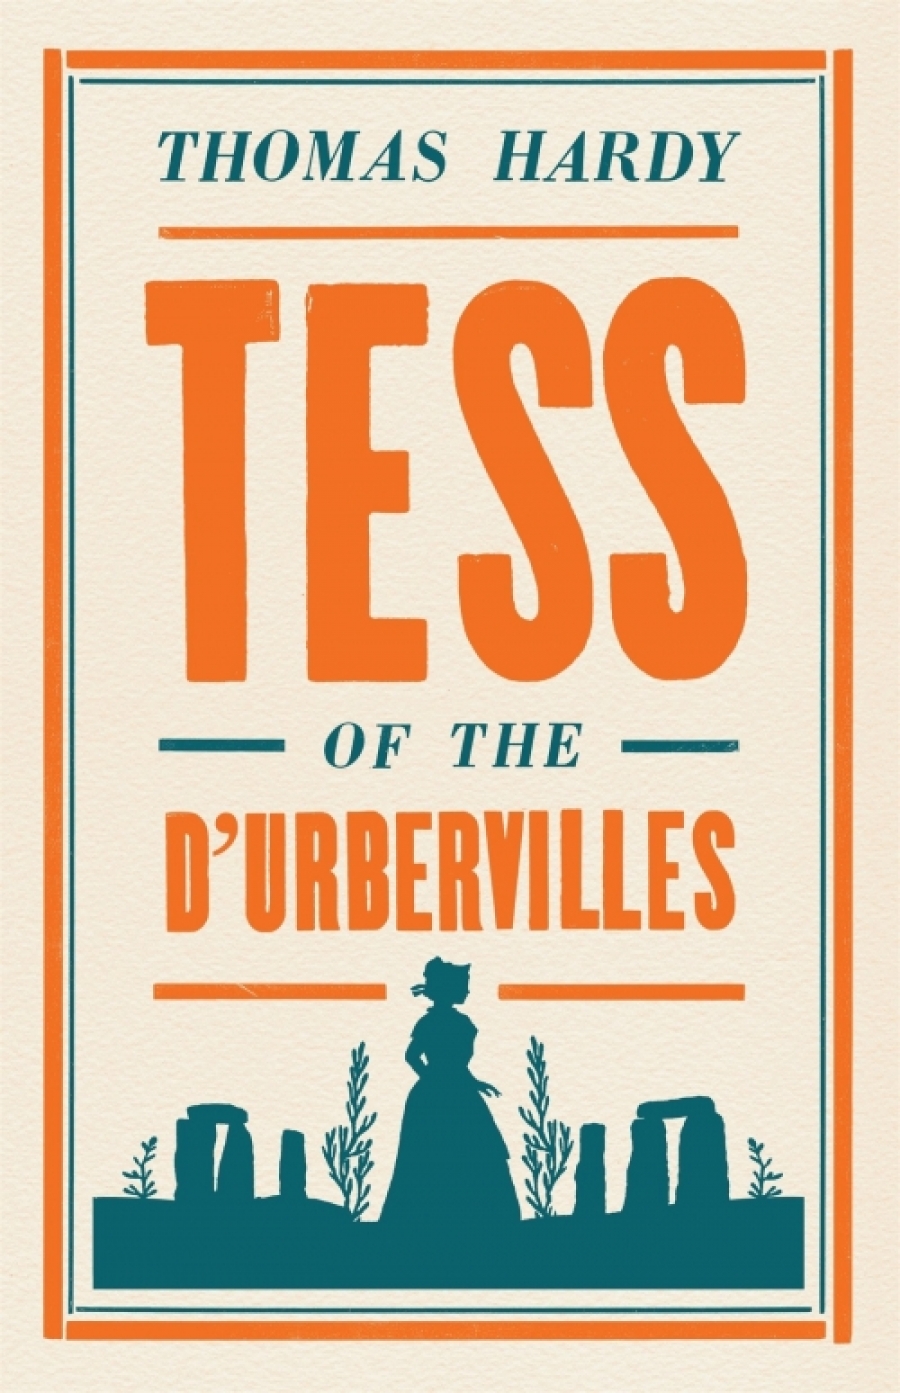 Hardy T. Tess of the d'Ubervilles 